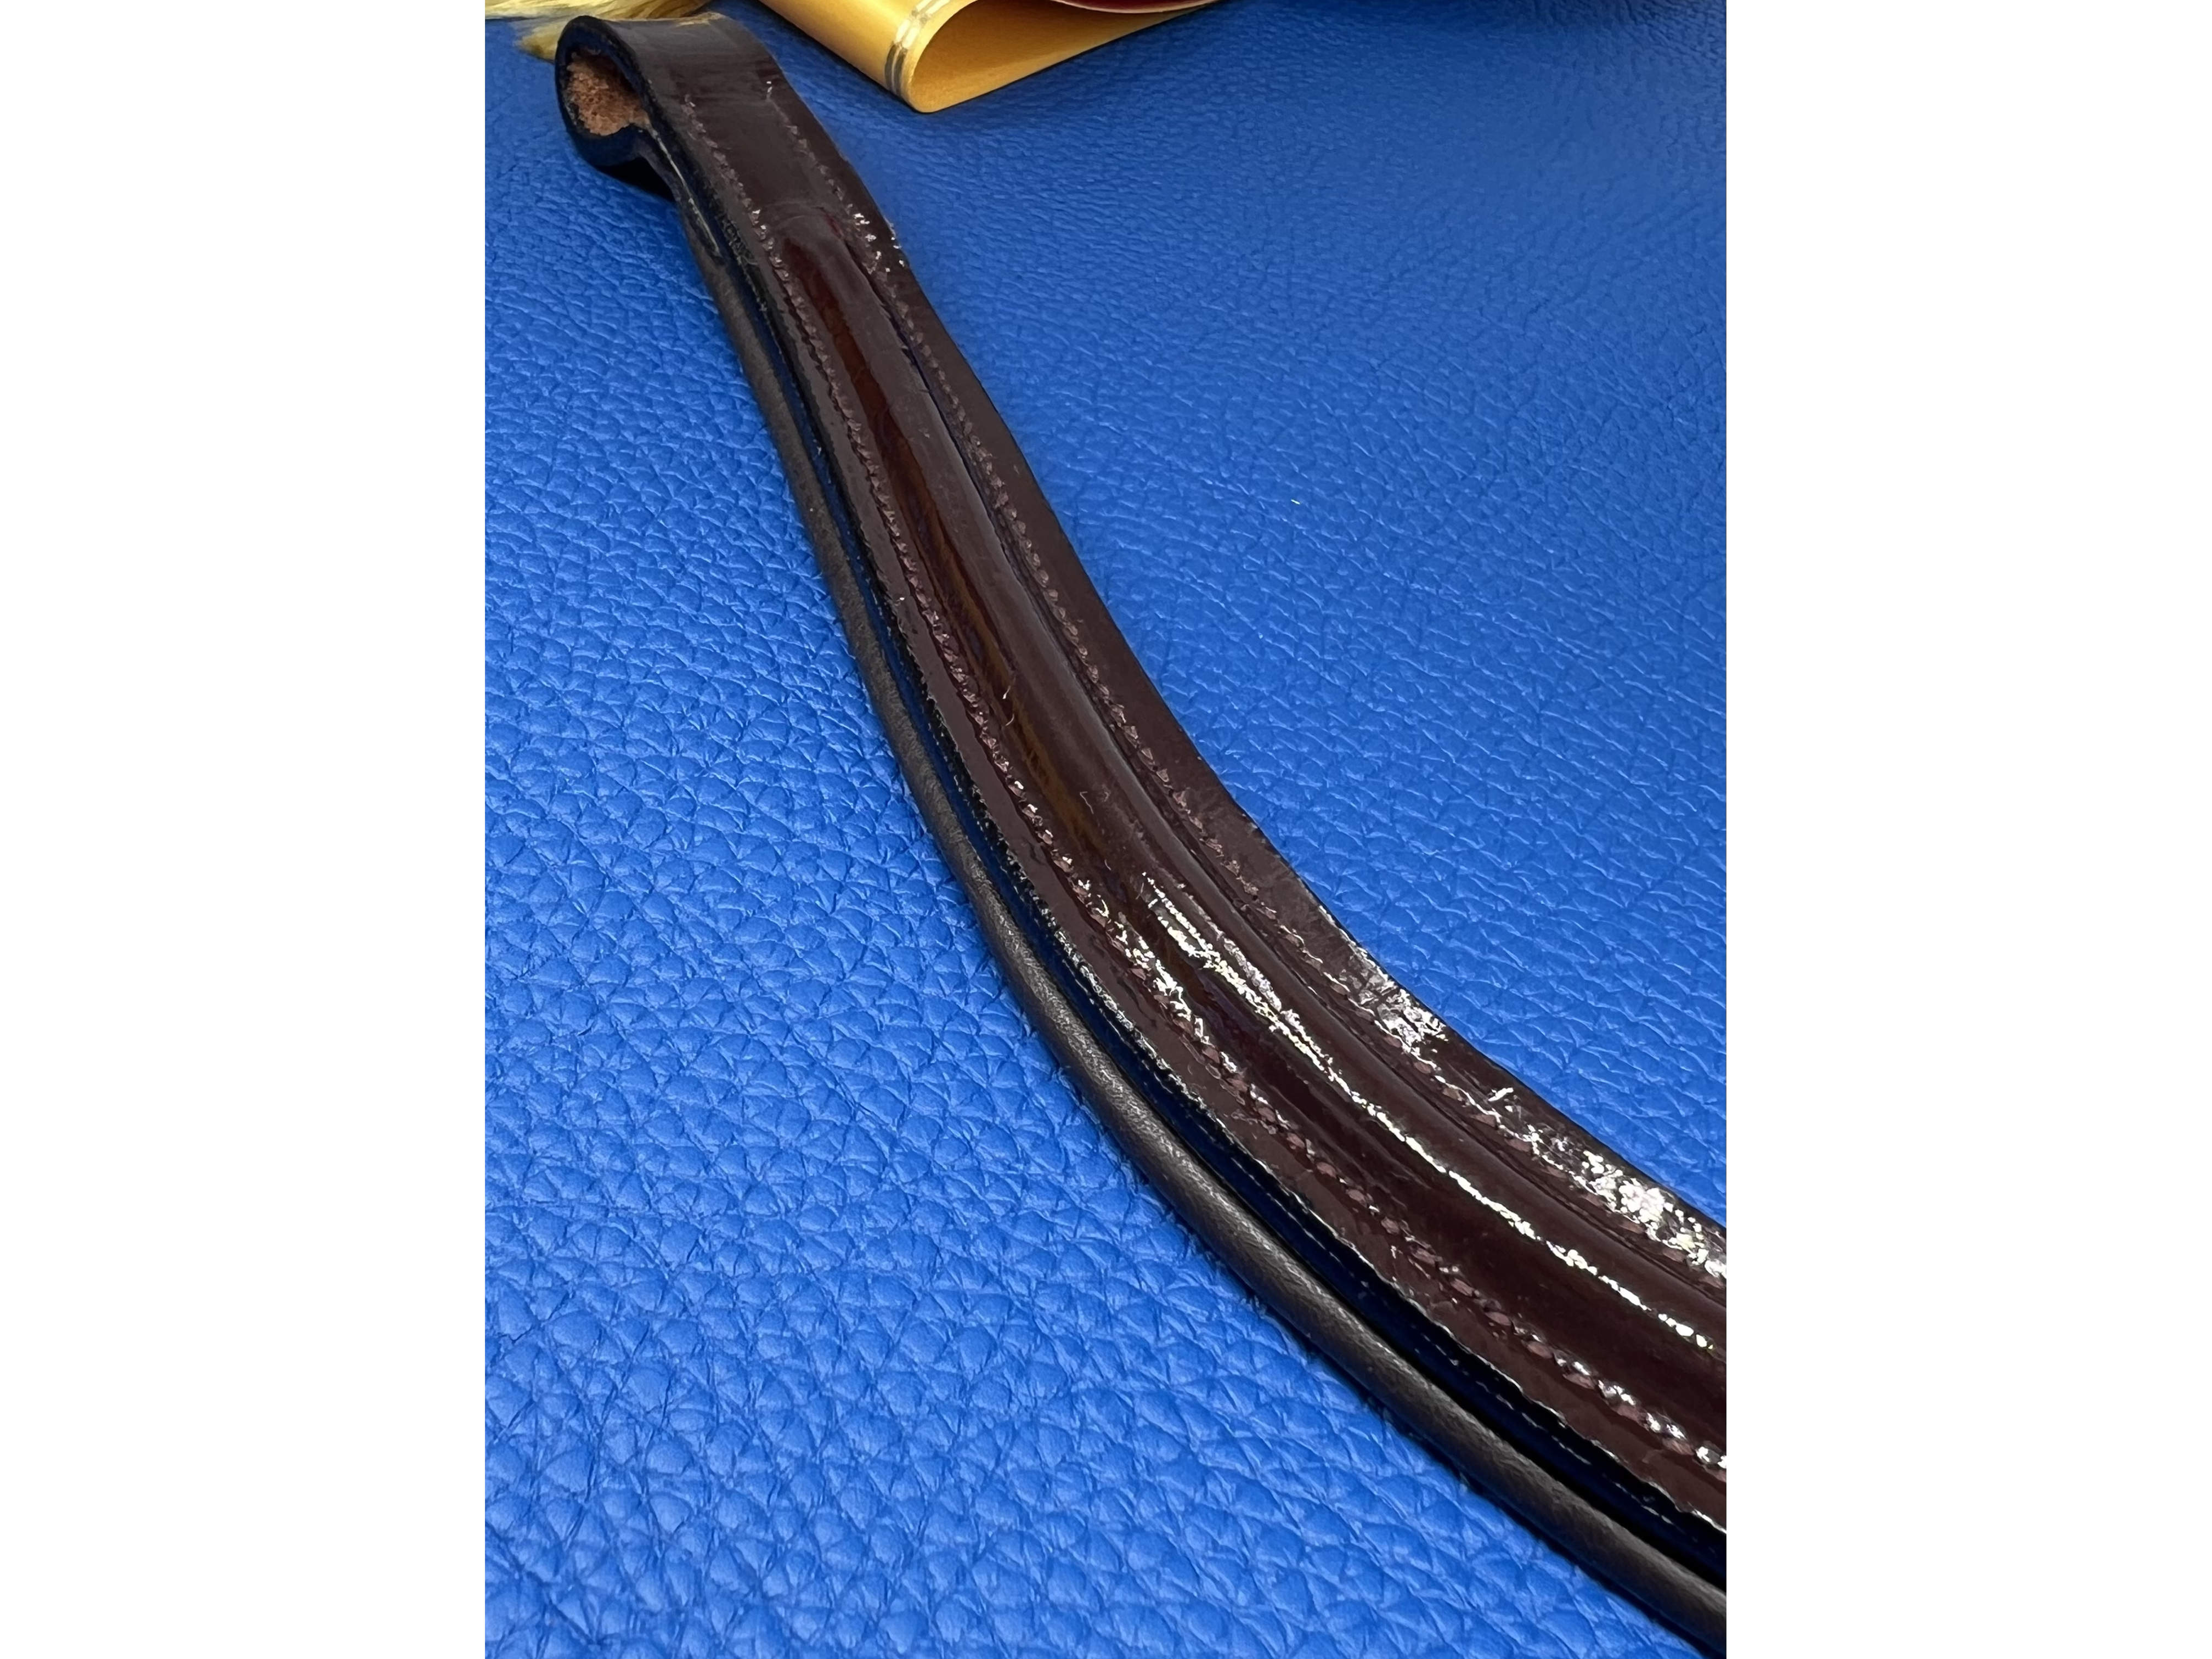 Patent Leather Browbands - All Styles - Empty Channel and Raised